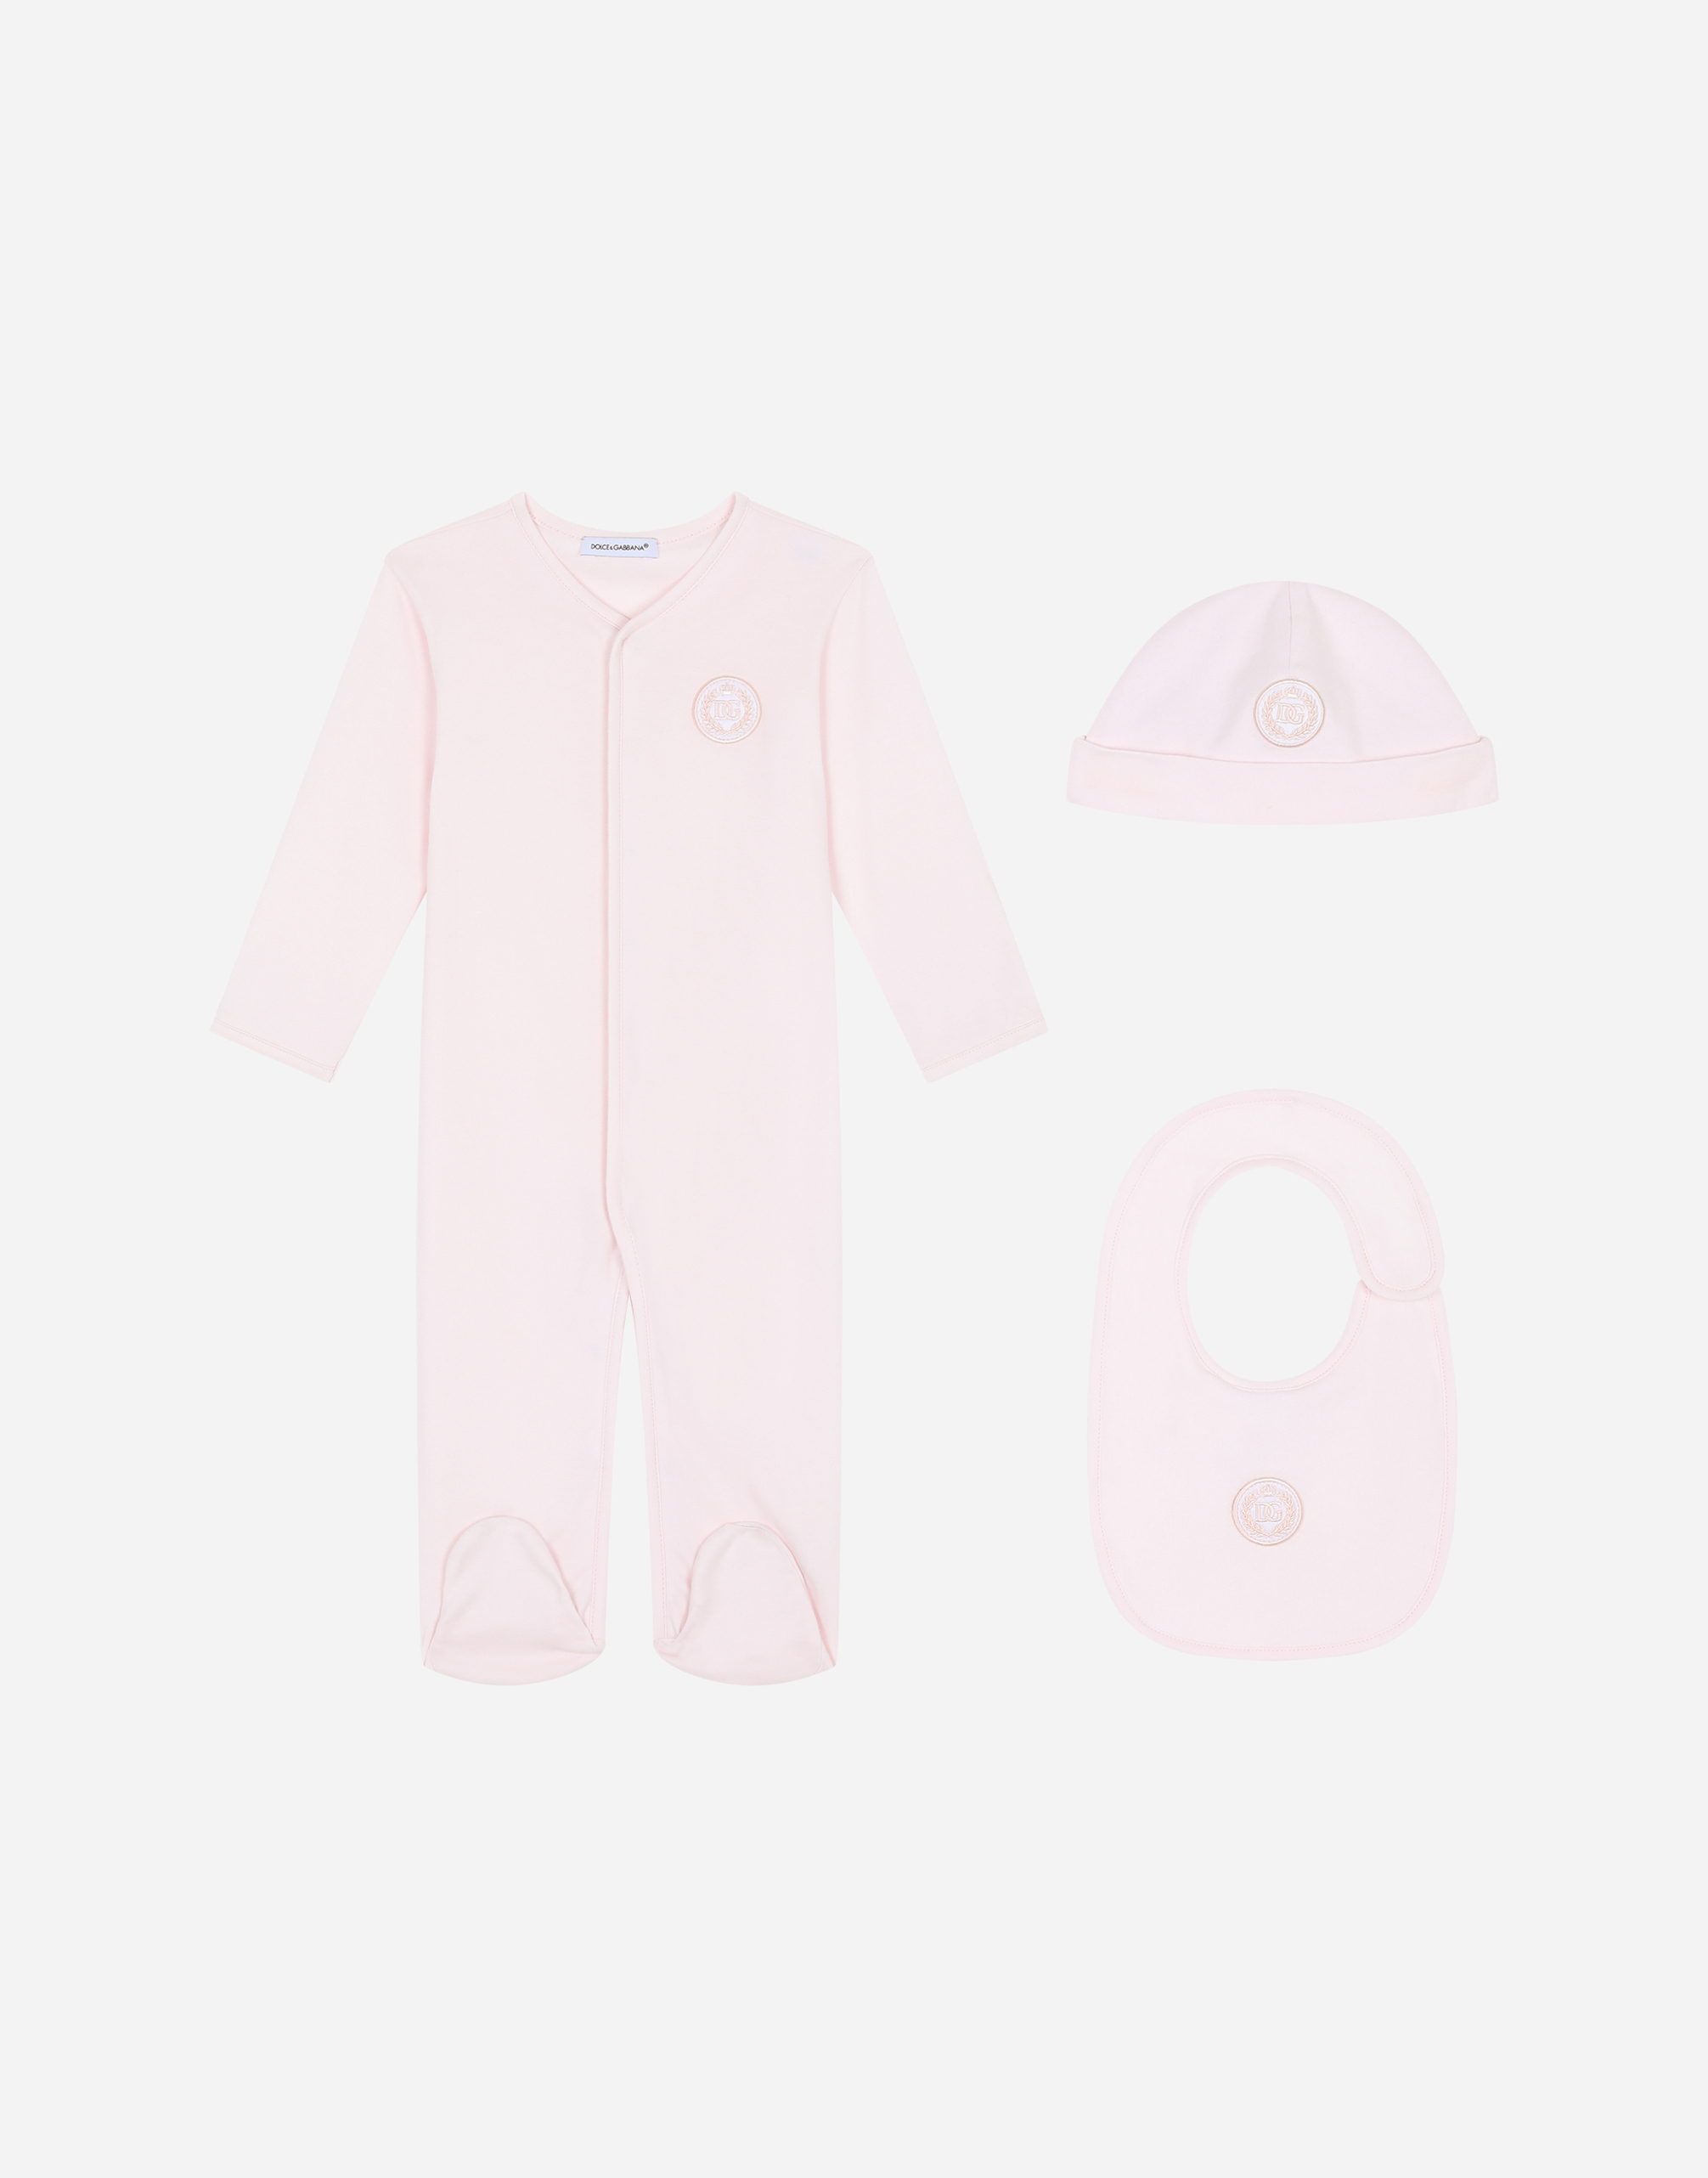 3-piece jersey gift set with DG laurel patch in Pink